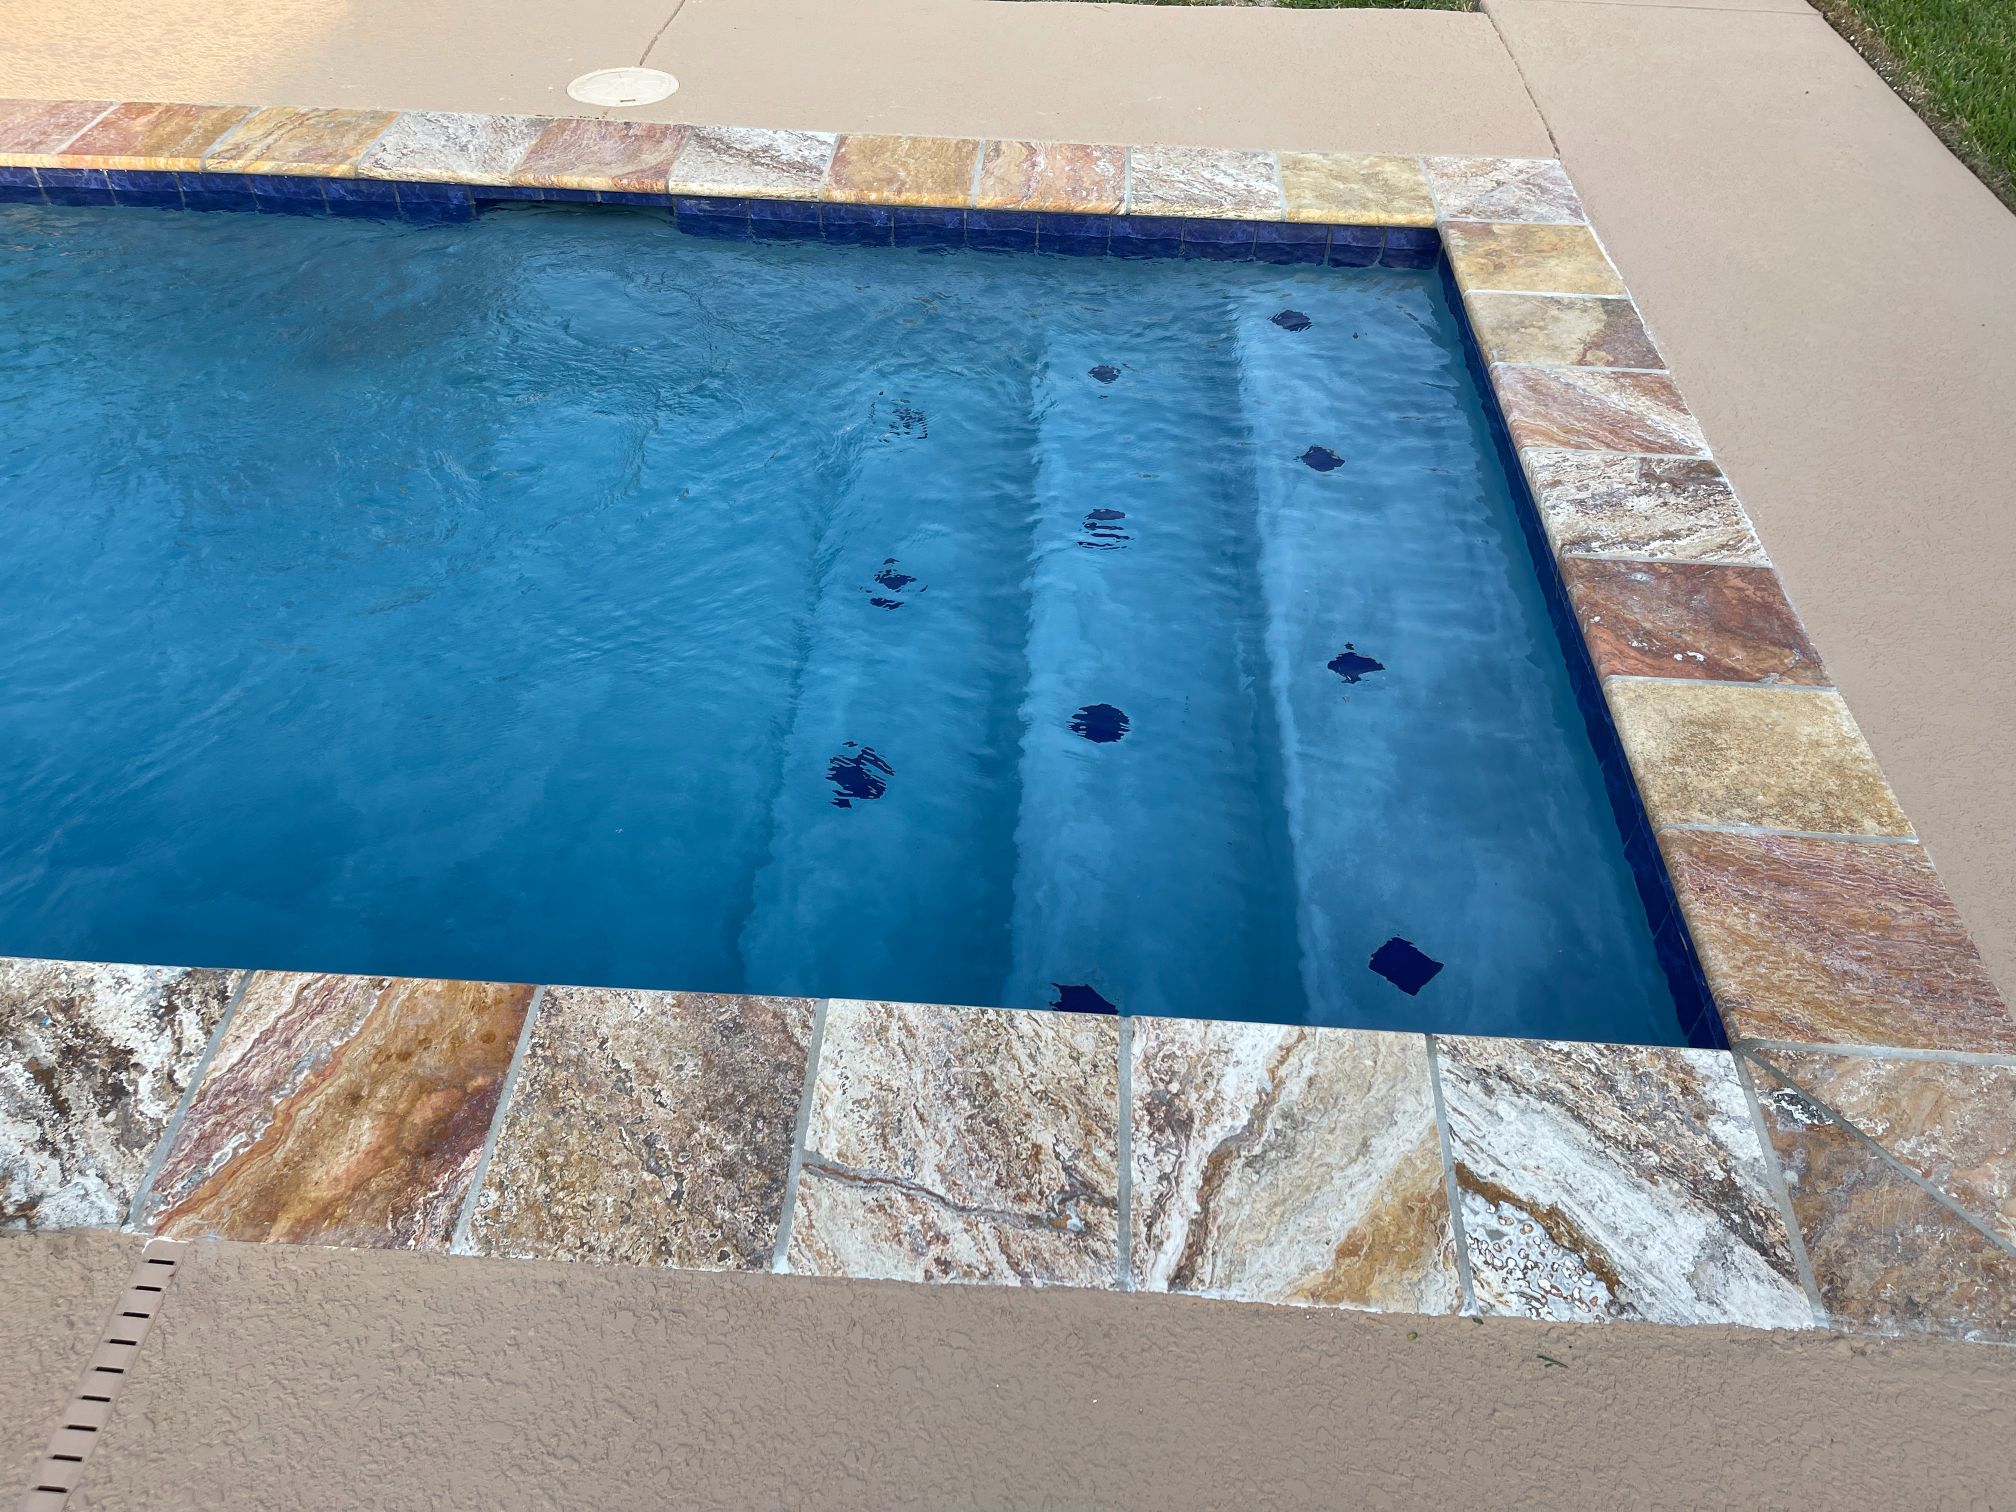 Gallery Images: Majestic Pools & Spas Pool Contractors